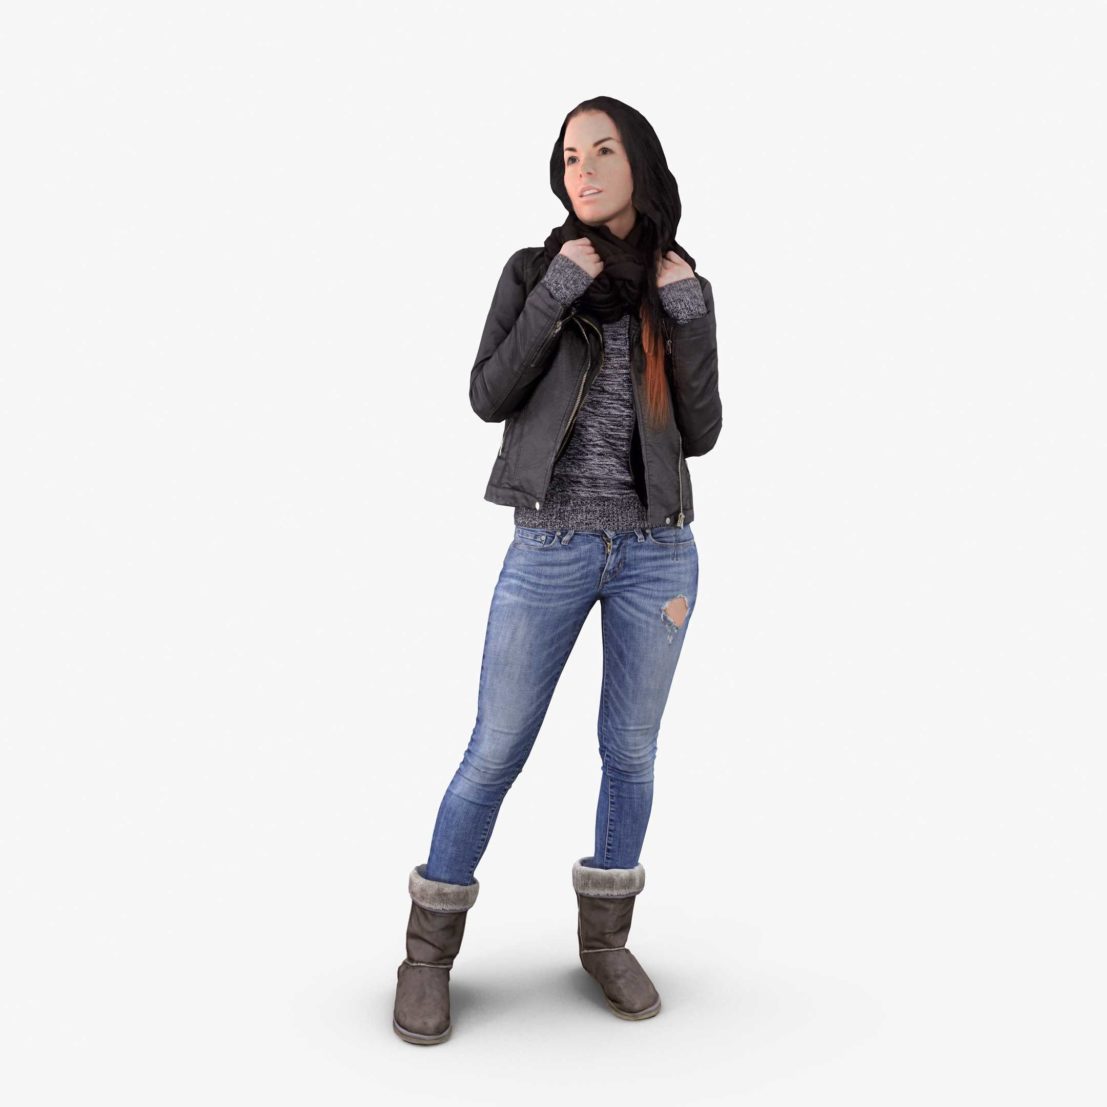 Casual Woman Posed 3D Model, for download files in 3ds, max, obj, fbx with low poly, game, and VR/AR options. Ready for 3D Printing.